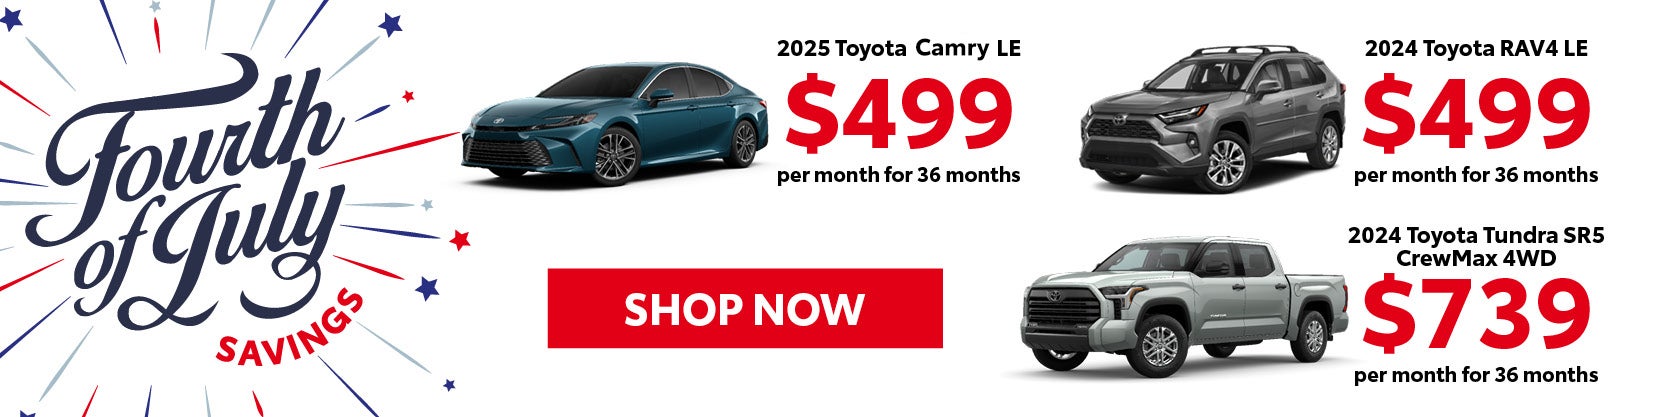 Toyota World of Clinton April 24 Lease Banner Mobile